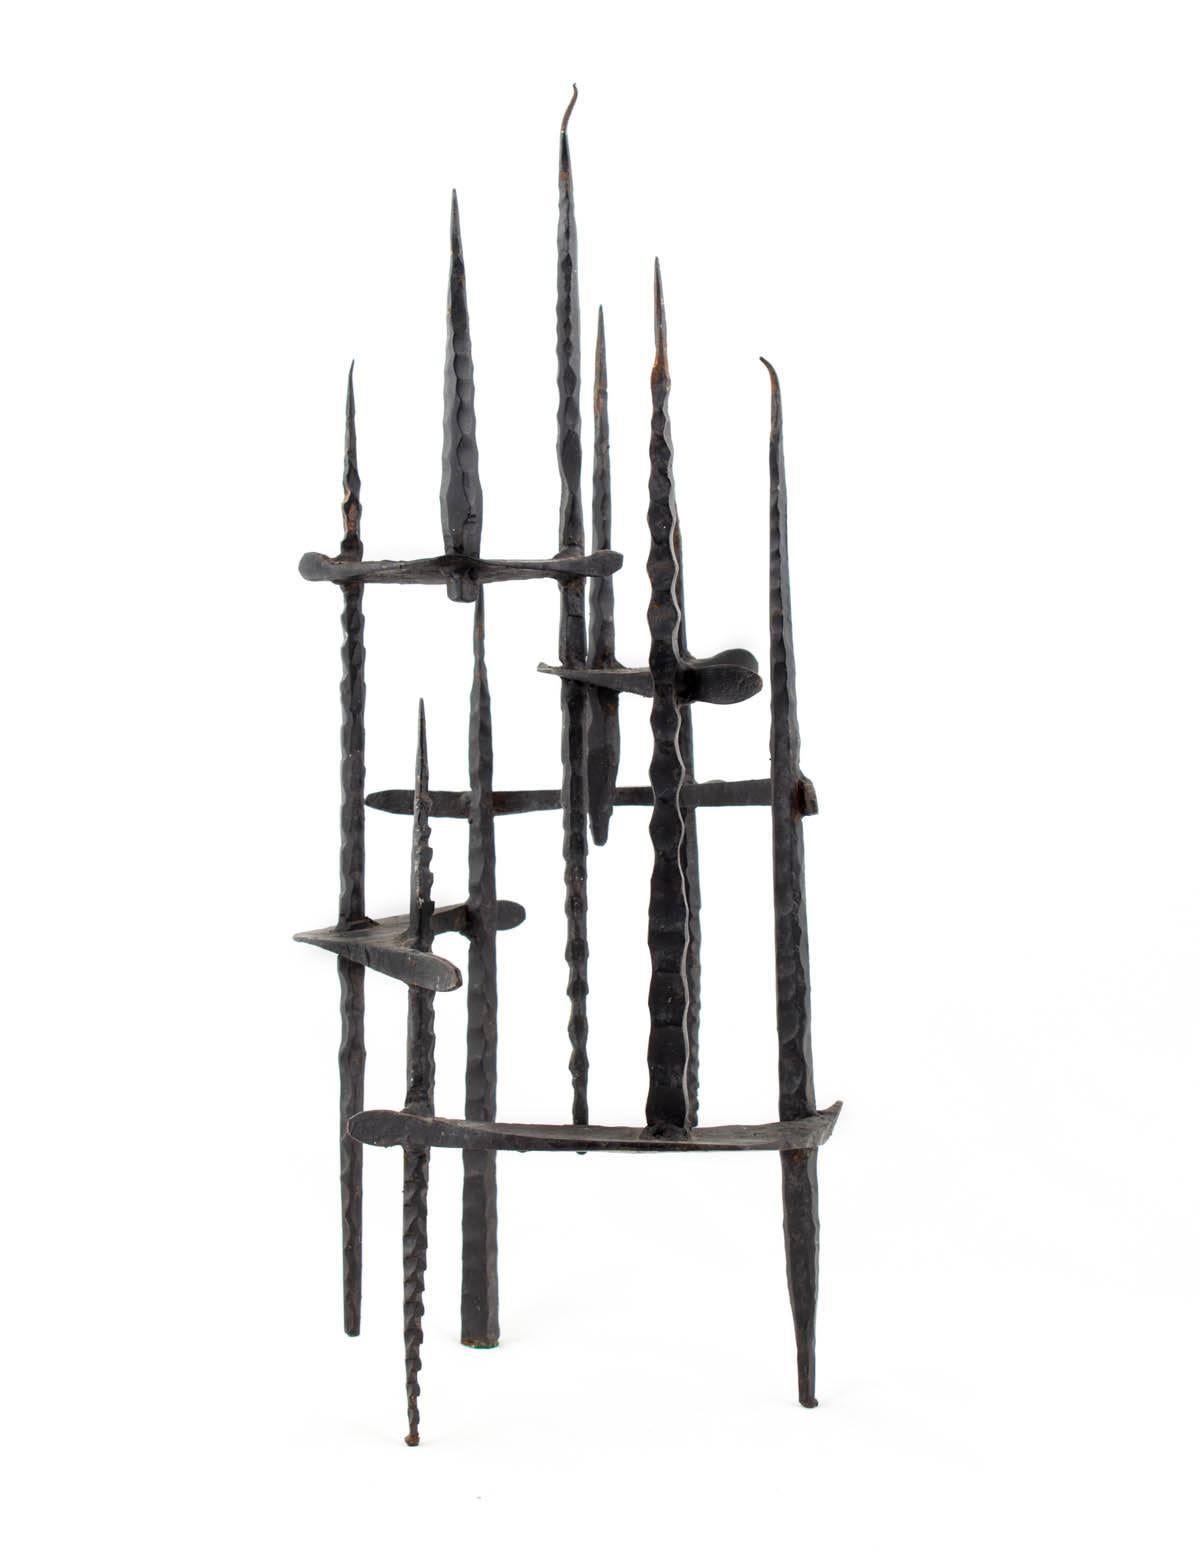 Hand Forged Iron Candelabra 
Holocaust Memorial Judaic Menorah Sculpture


David Palombo was an Israeli sculptor and painter. He was born in Turkey and immigrated to the Land of Israel with his parents in 1923. In 1940 he began his studies at